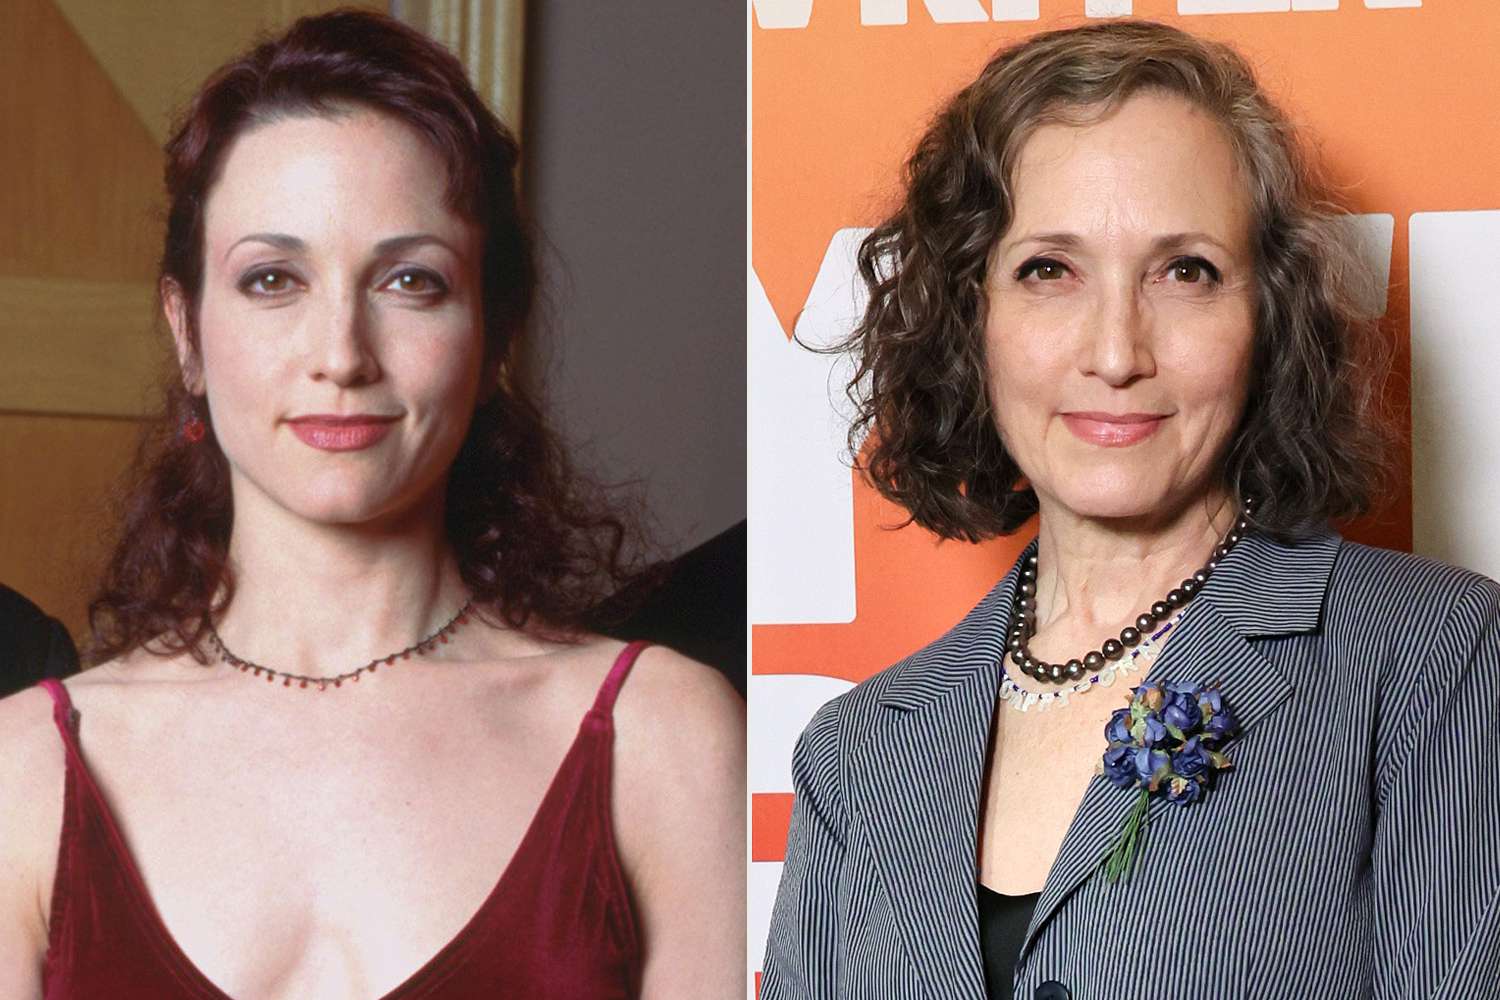 FRASIER -- Bebe Neuwirth as Dr. Lilith Sternin; Bebe Neuwirth attends the "Pay The Writer" opening night